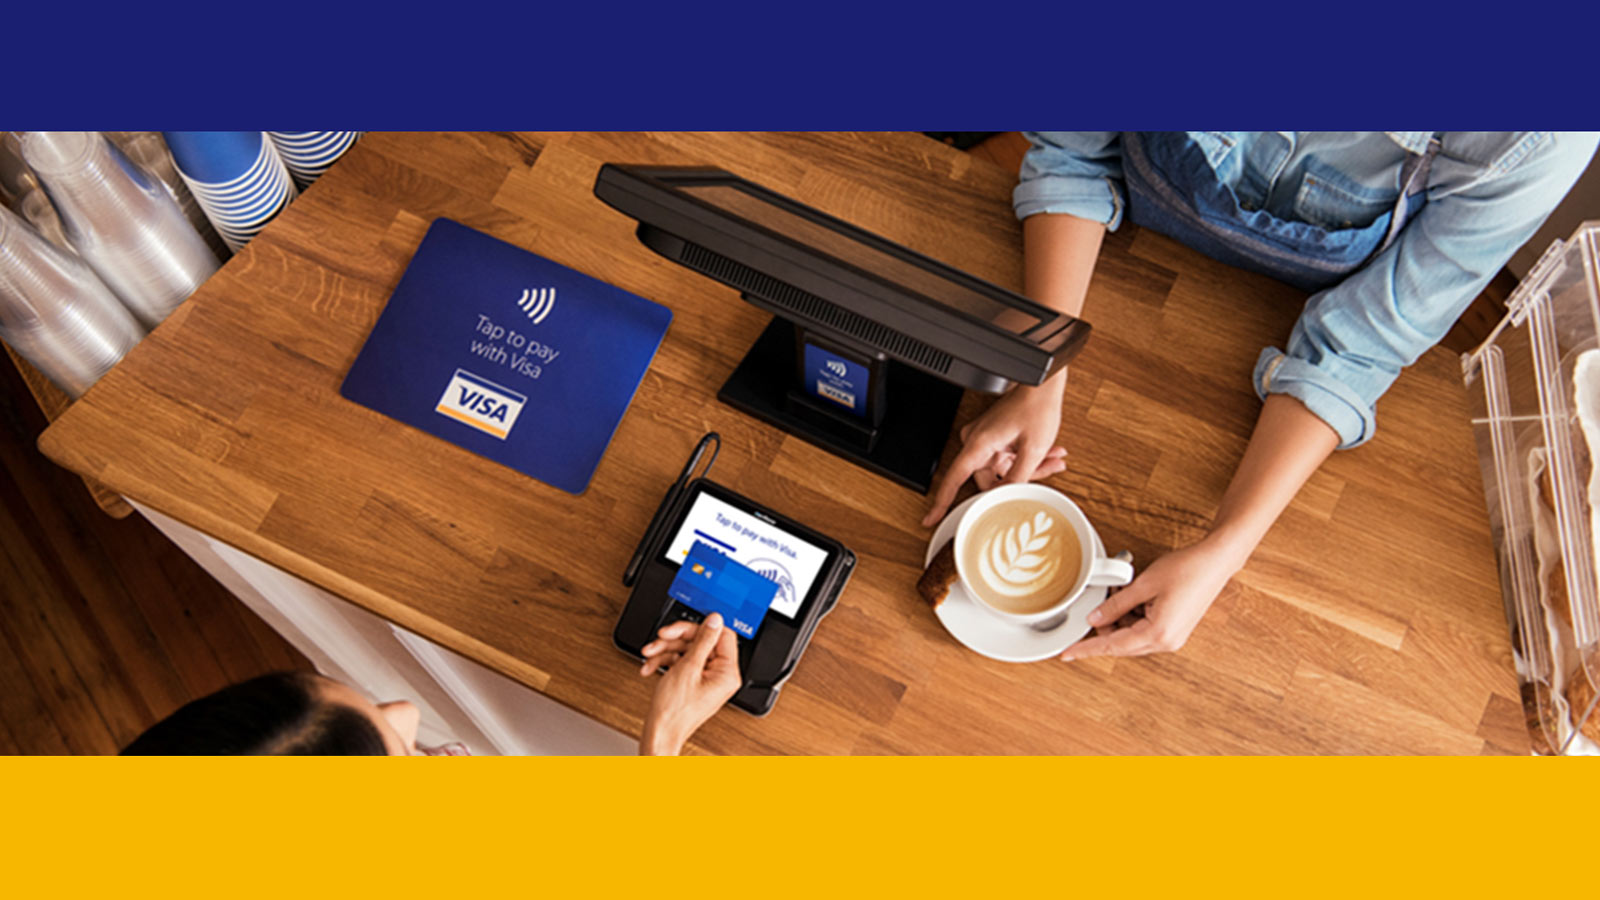 Image of an individual buying a coffee and paying using a Visa card for a cashless payment.